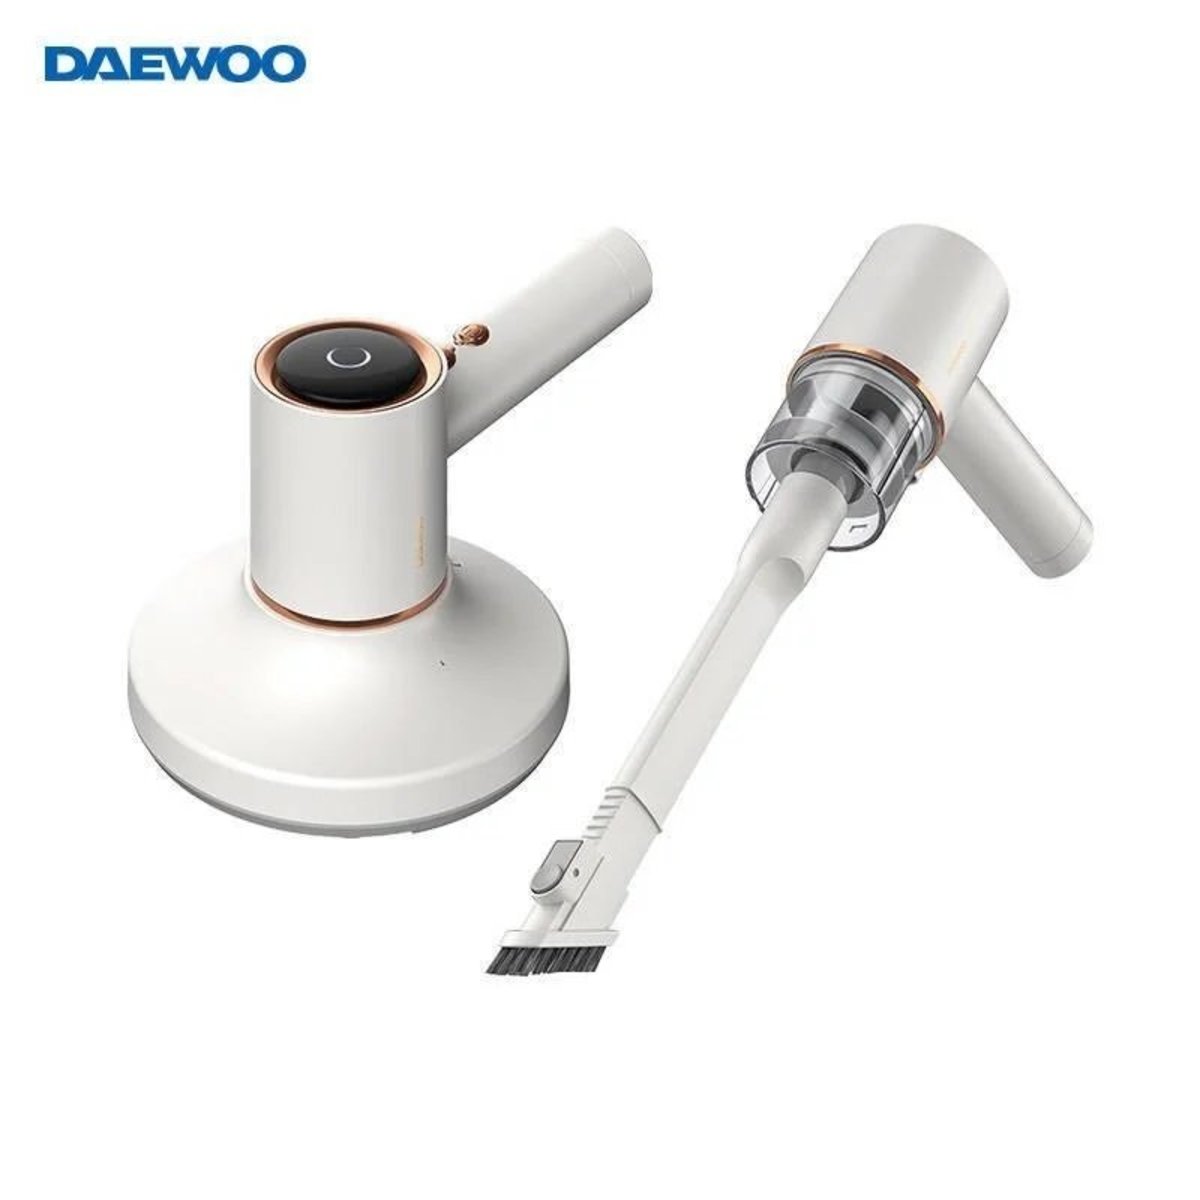 DAEWOO - South Korea's Daewoo V1 three-in-one smart wireless mite removal vacuum cleaner | Mite removal machine | Vacuum cleaner 